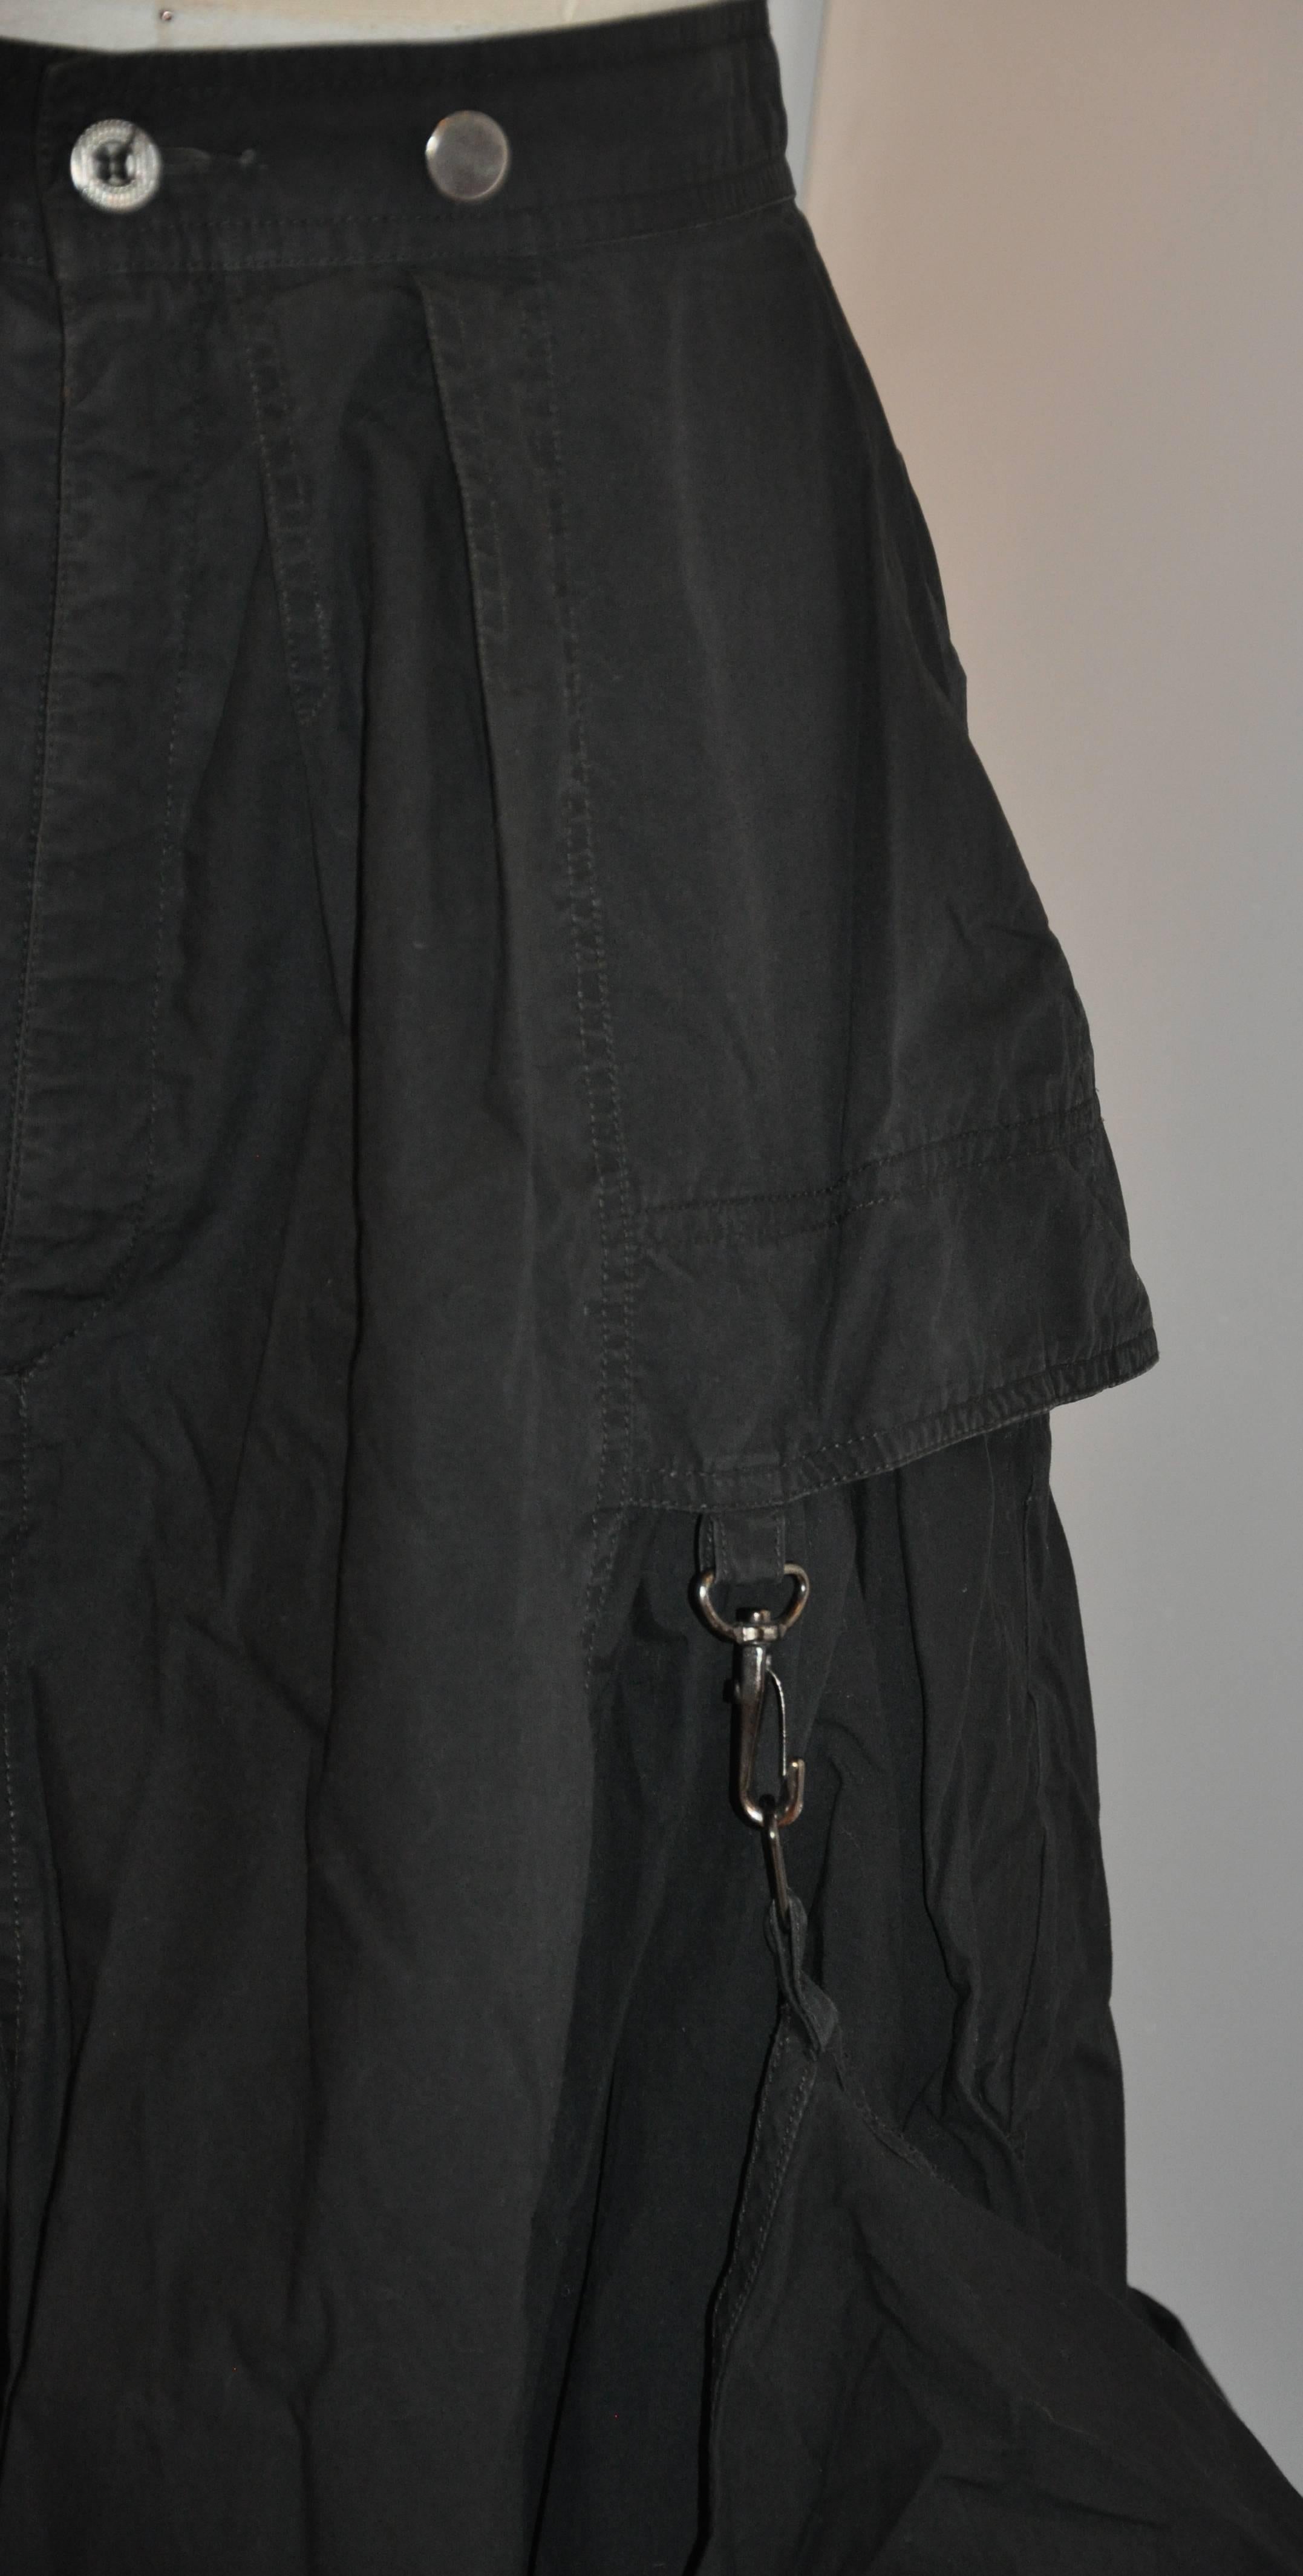      Kansai Yamamoto whimsical black cotton deconstructed skirt is detailed with two high slits on the sides under the two large side pockets. There are four optional hooks on the hem to raise both front and/or back if desired. The two large pockets